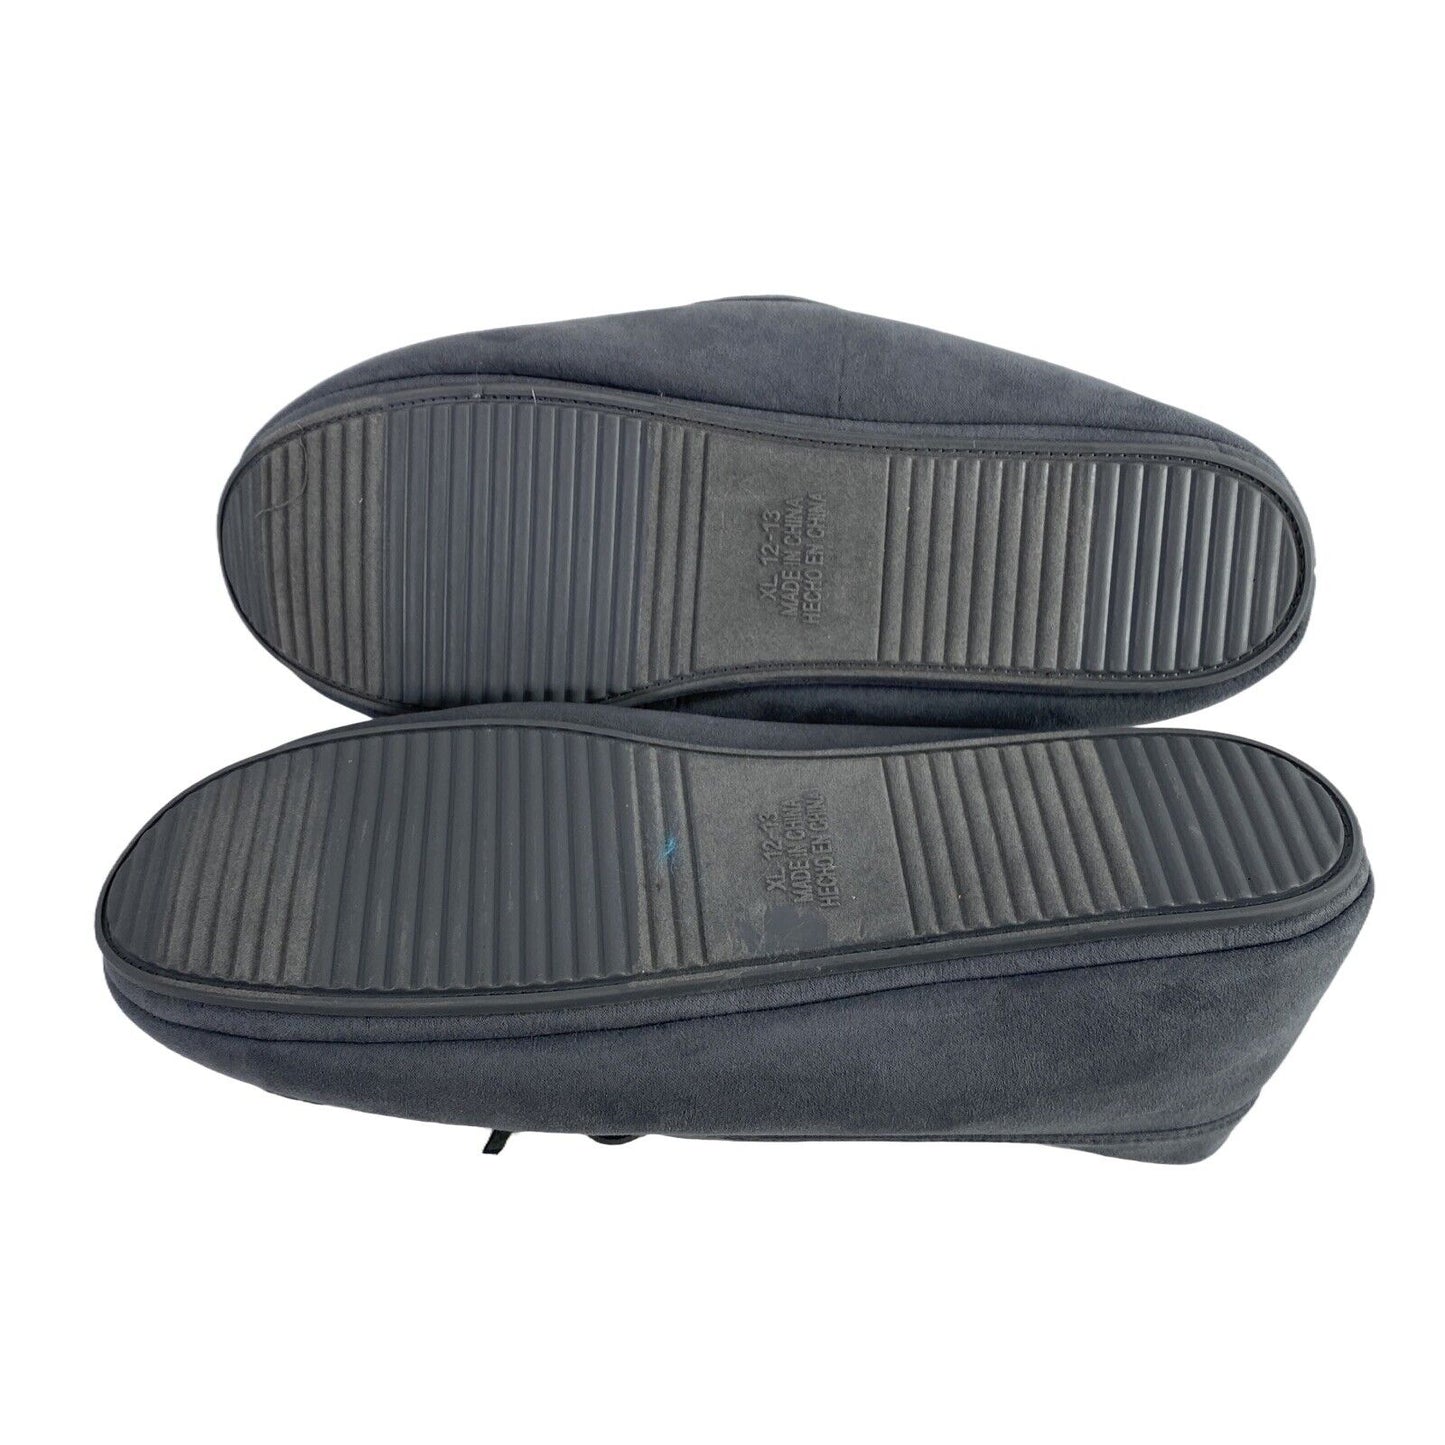 NEW Old Navy Men's Gray Fabric Fleece Lined Moc Slippers - 12/13